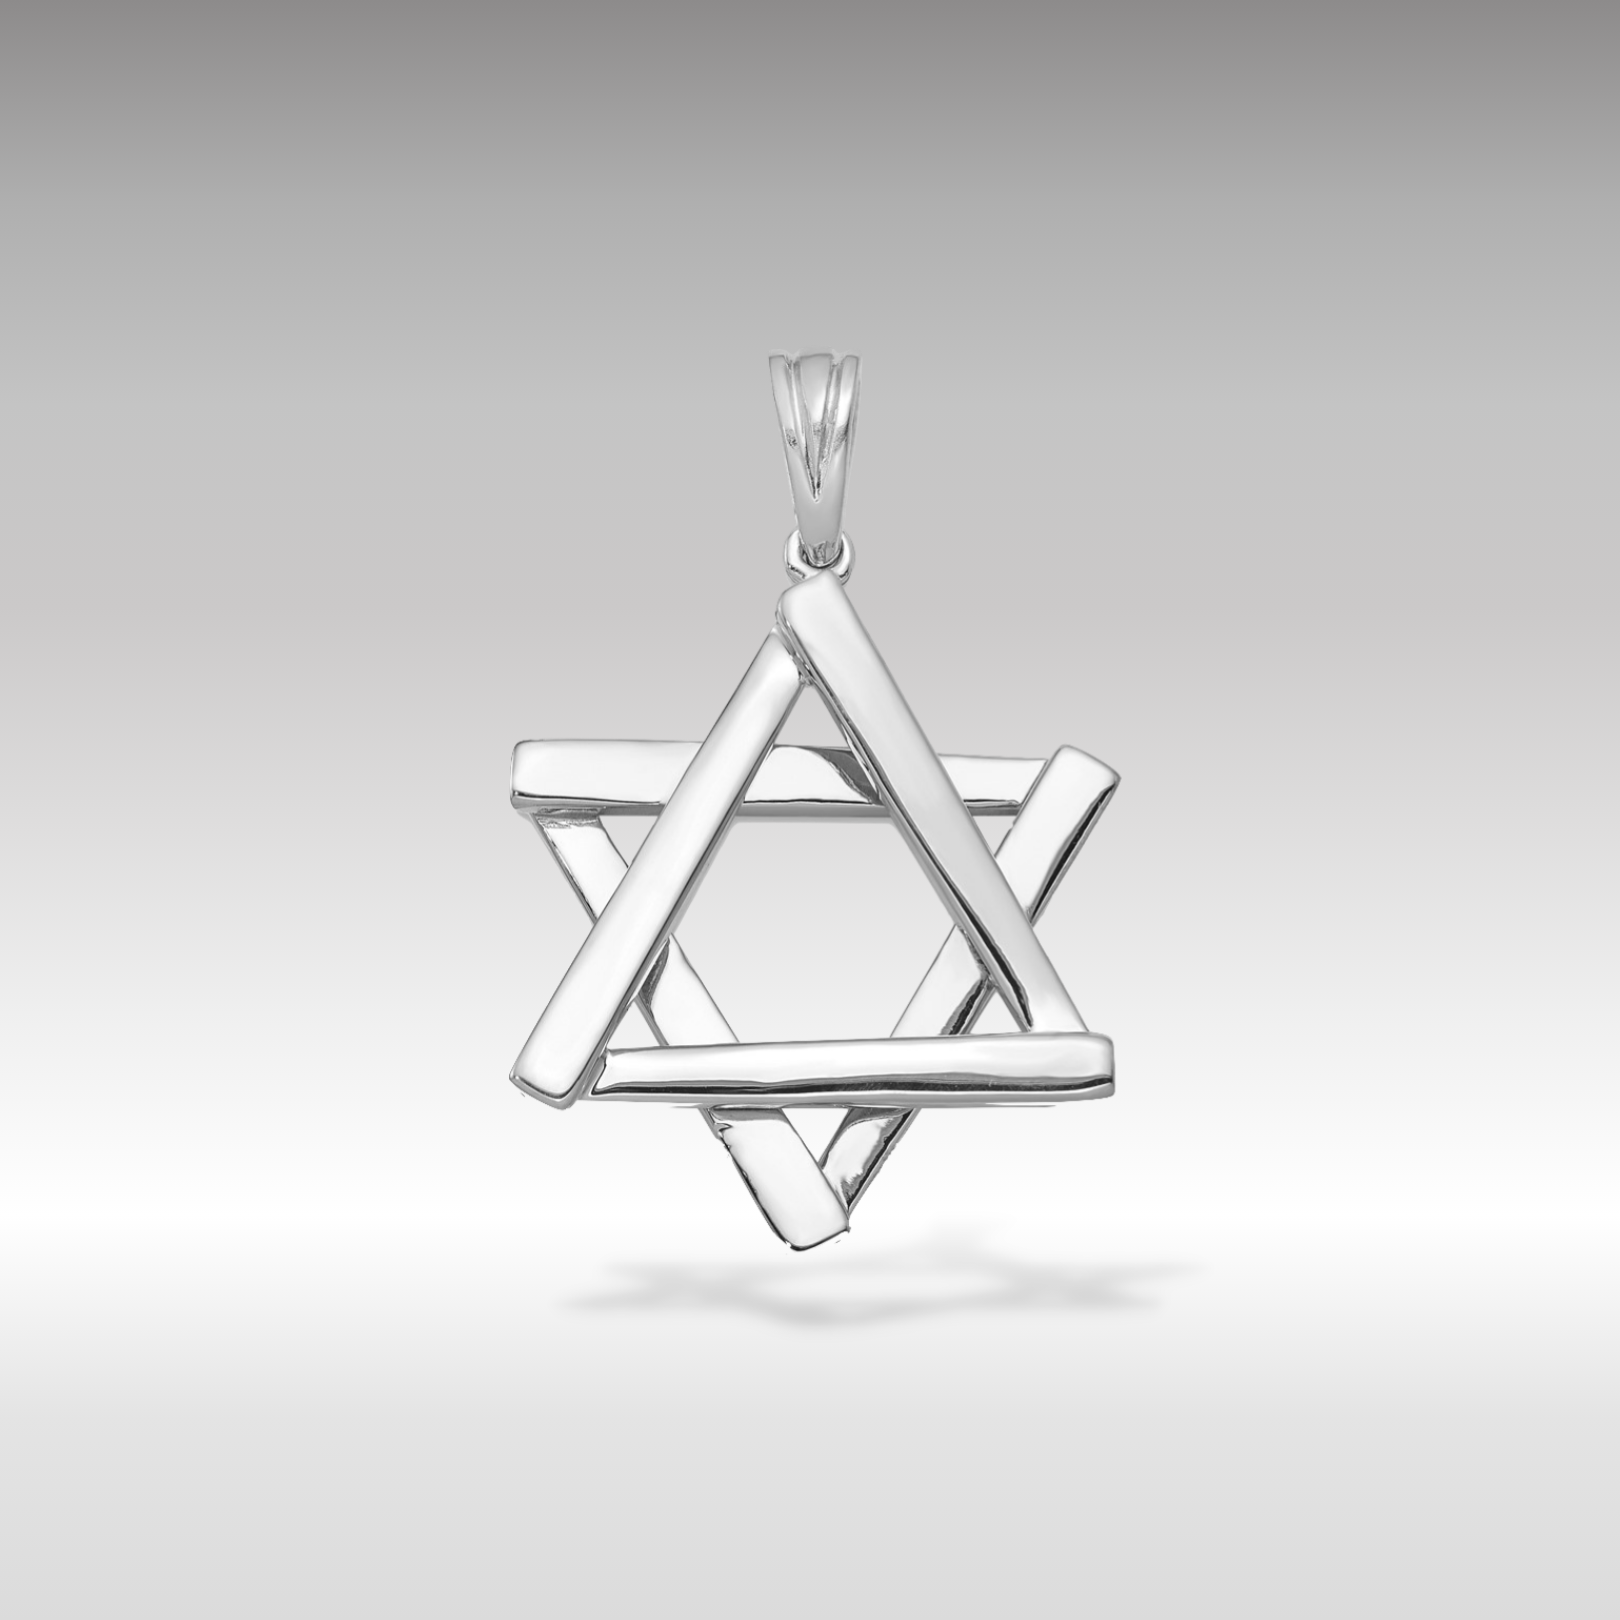 14K White Gold Large Star of David Pendant - Charlie & Co. Jewelry